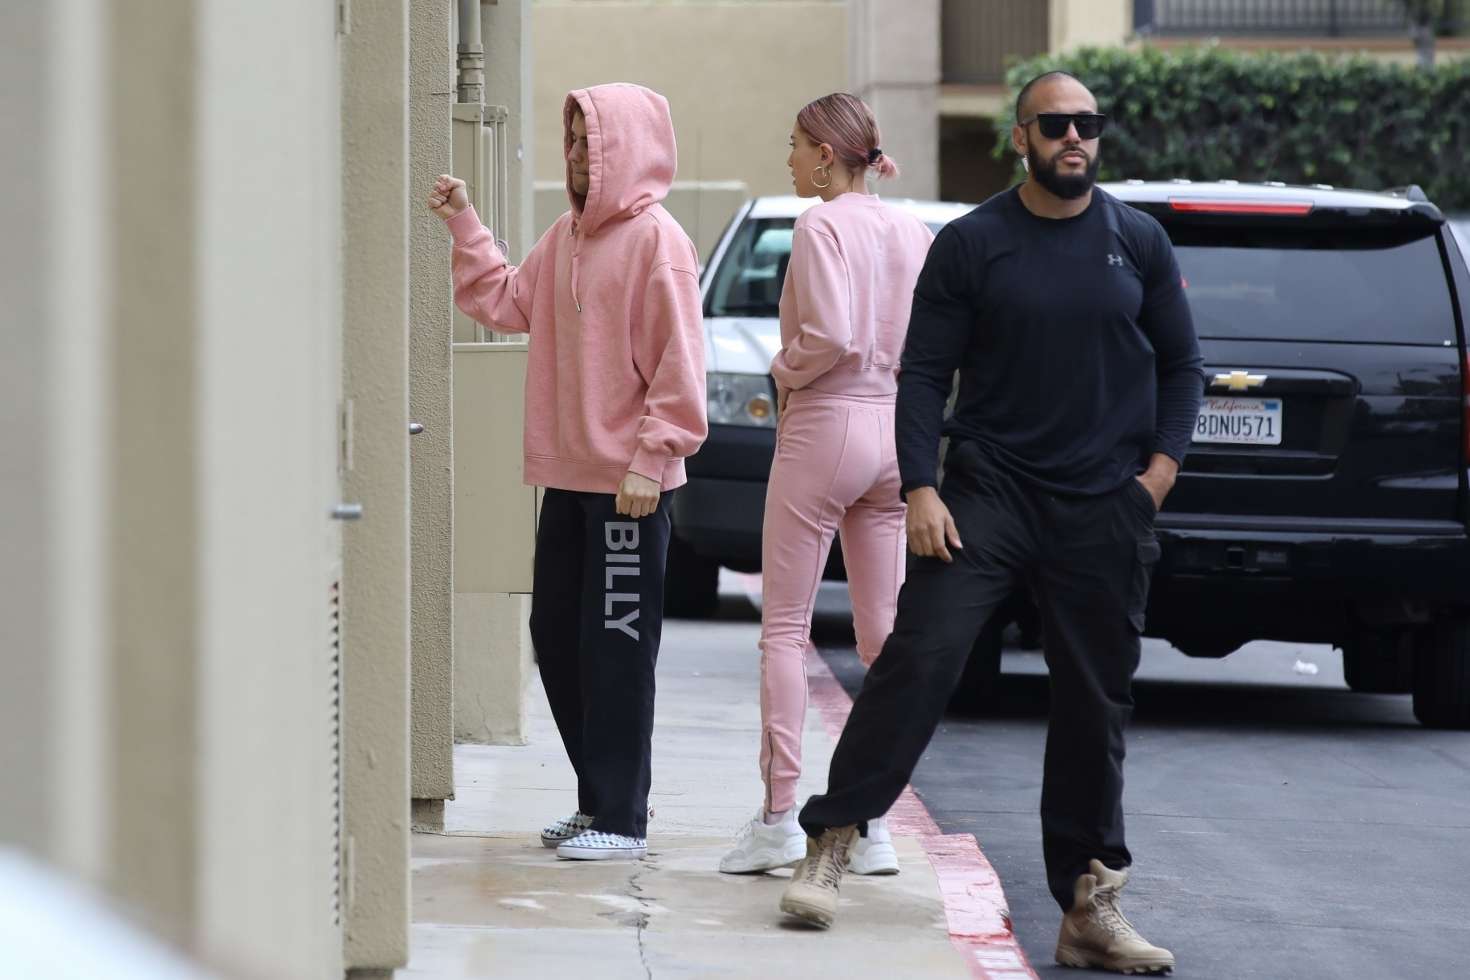 Hailey Baldwin and Justin Bieber â€“ Arriving at West Valley Medical Center in Encino